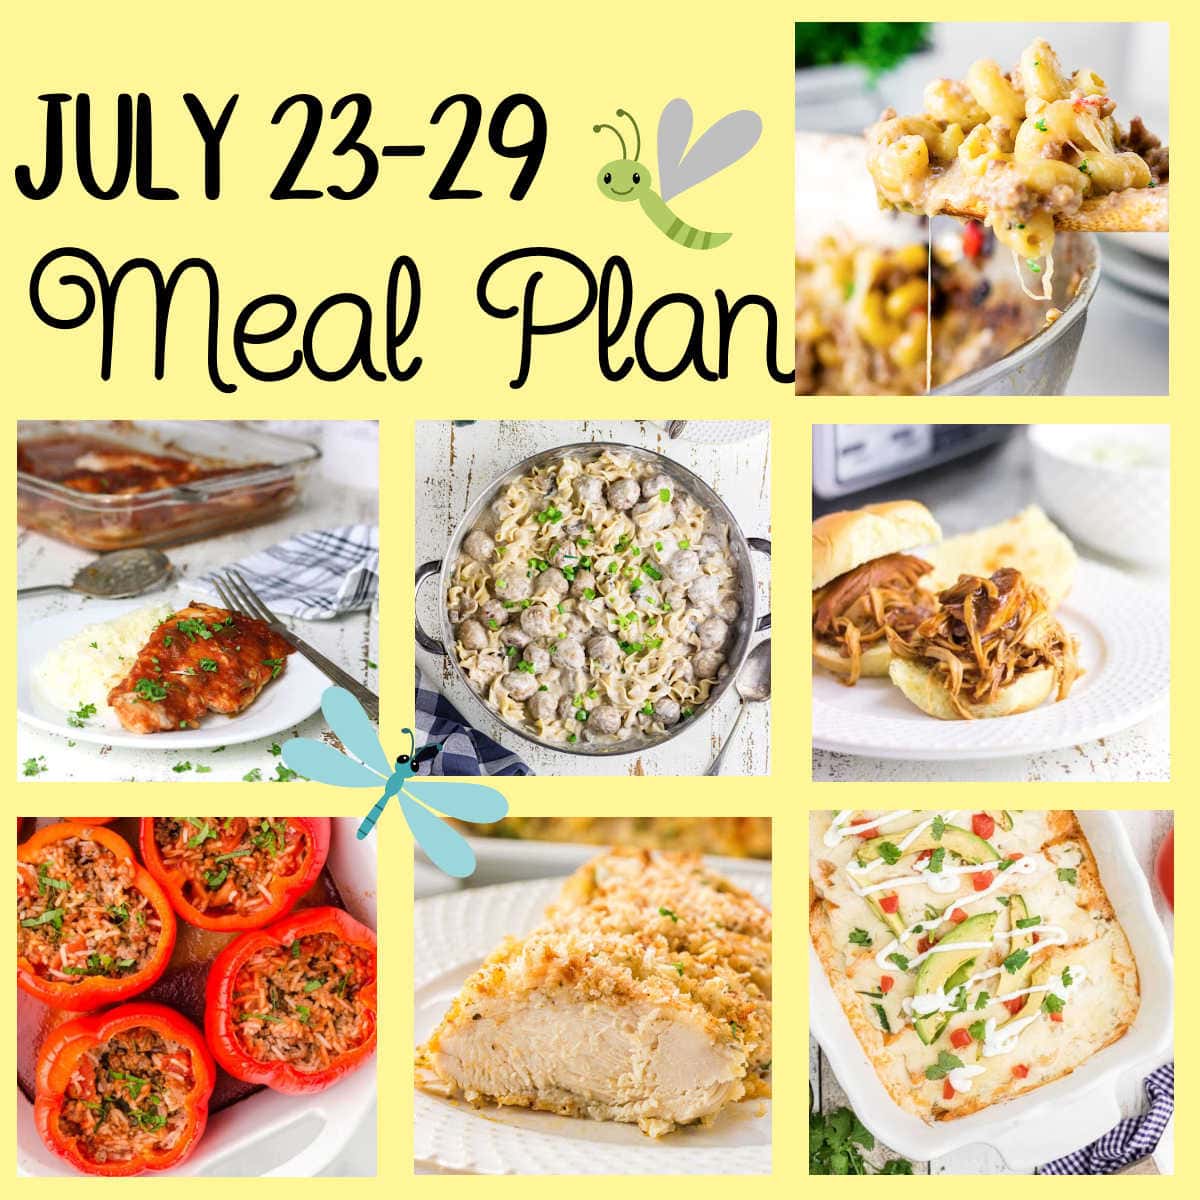 Title image for the July 23-29 meal plan.